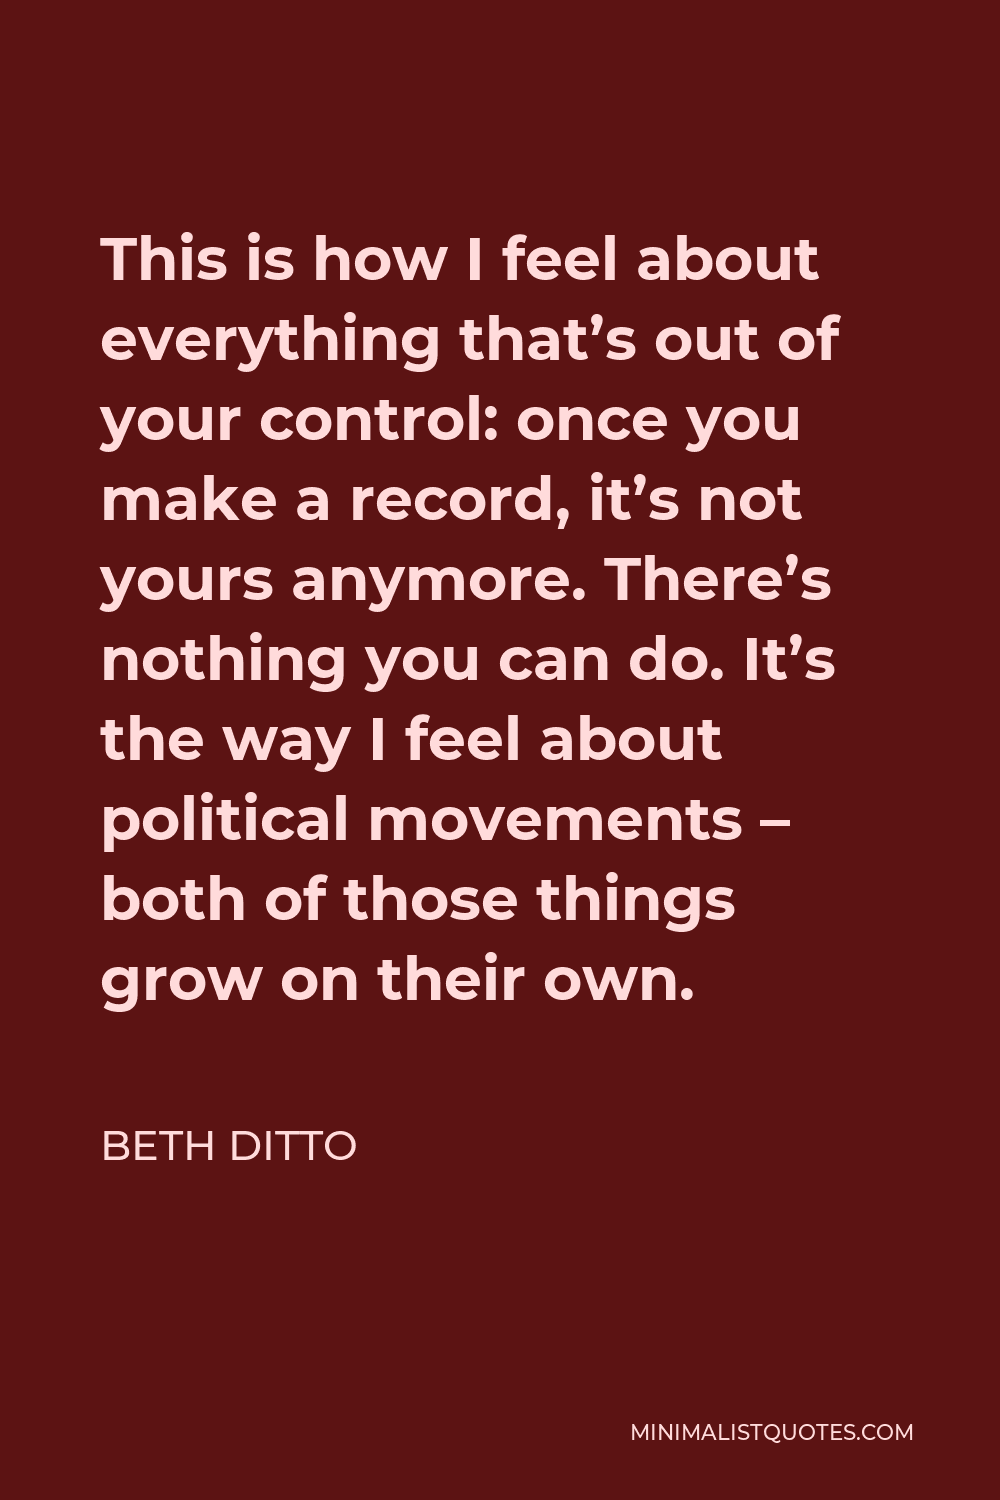 Beth Ditto Quote: “You know how people love to glamorize poverty